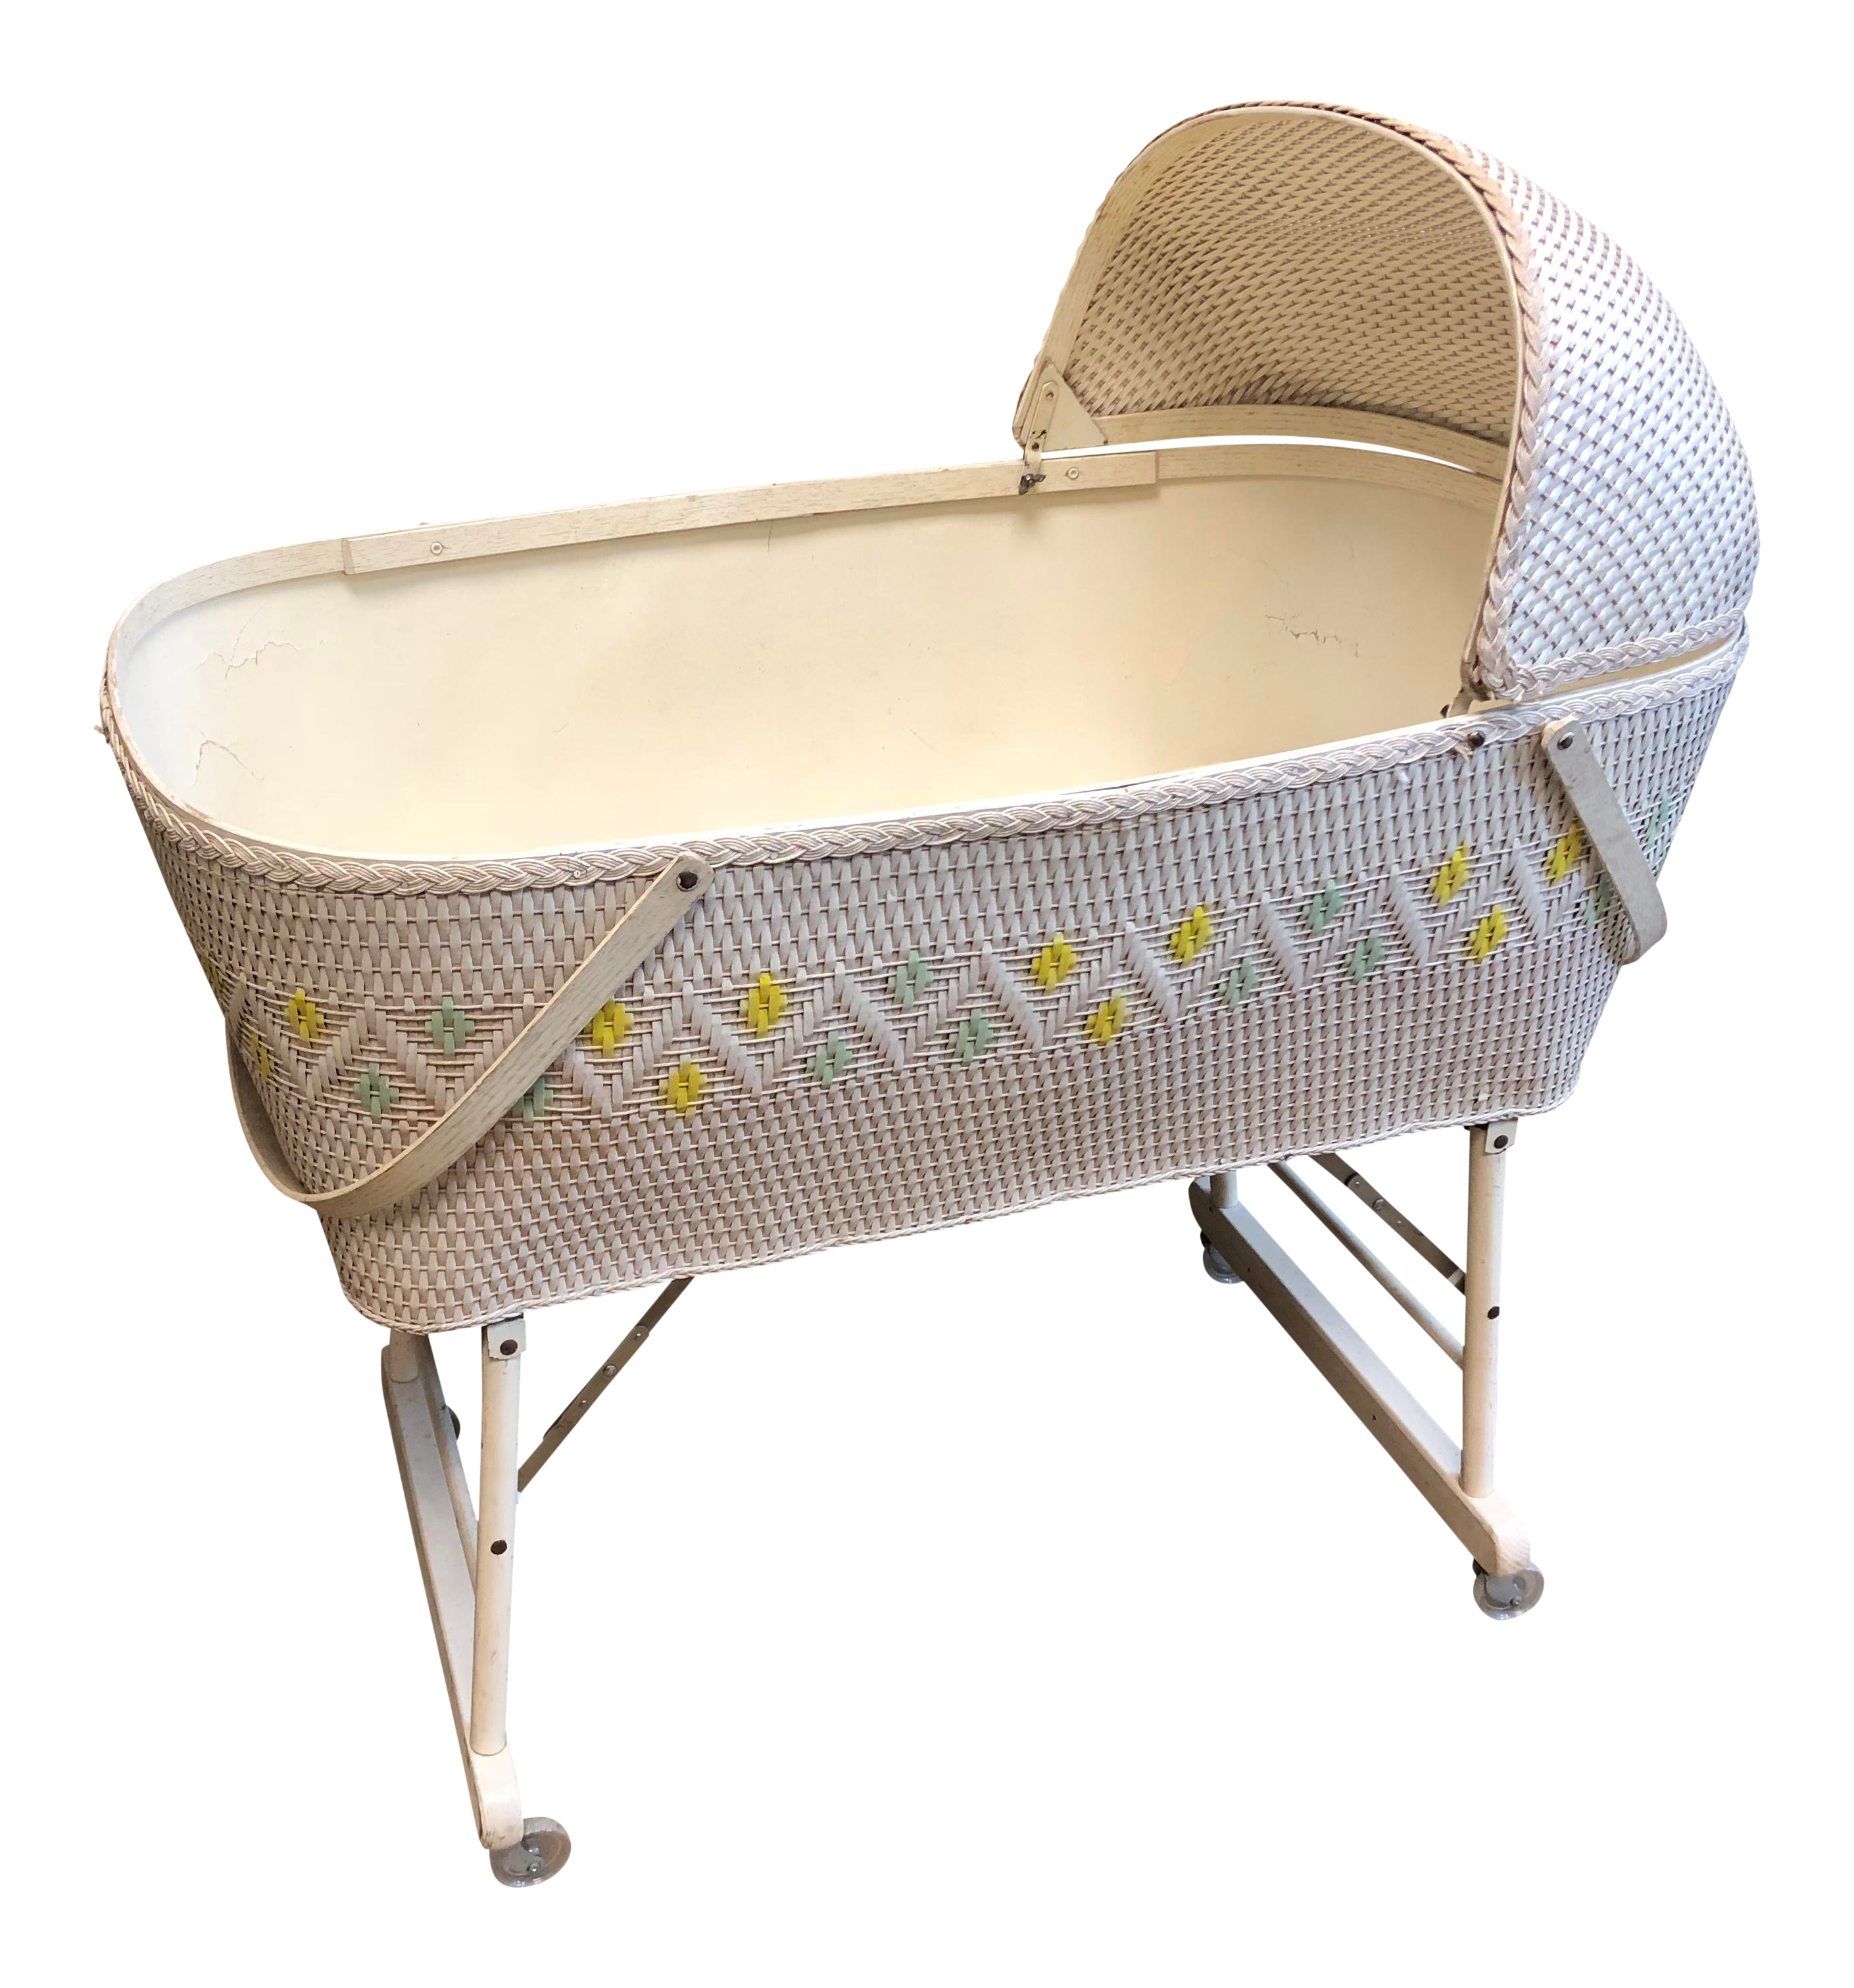 sids approved bassinet